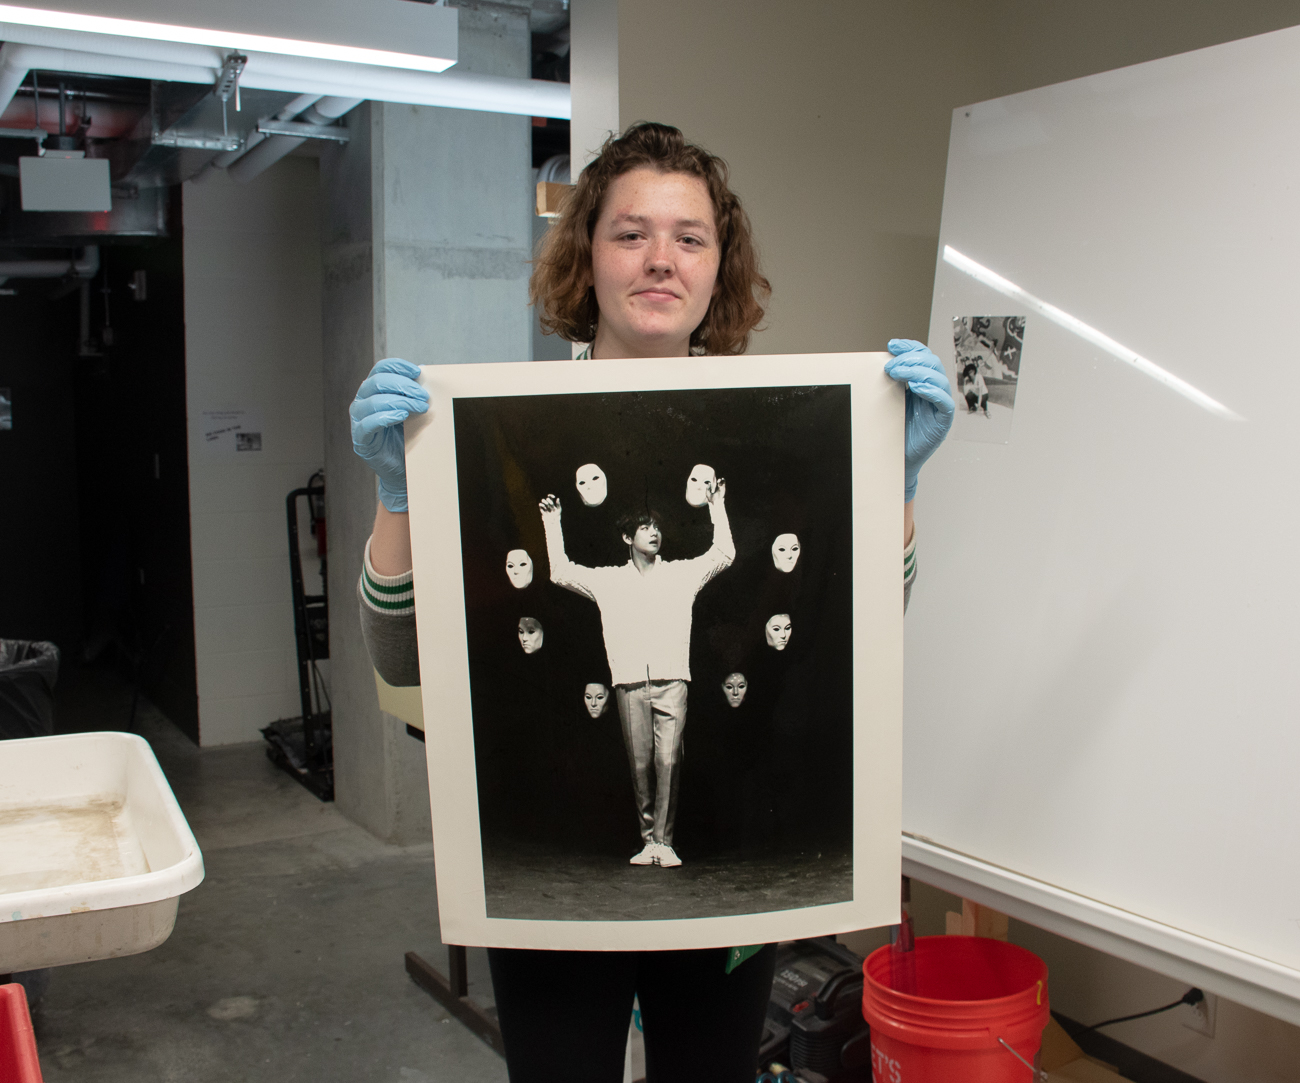 A female student holds up a large photo print of a man with his arms up surrounded by what looks to be porcelein heads against a black backdrop.